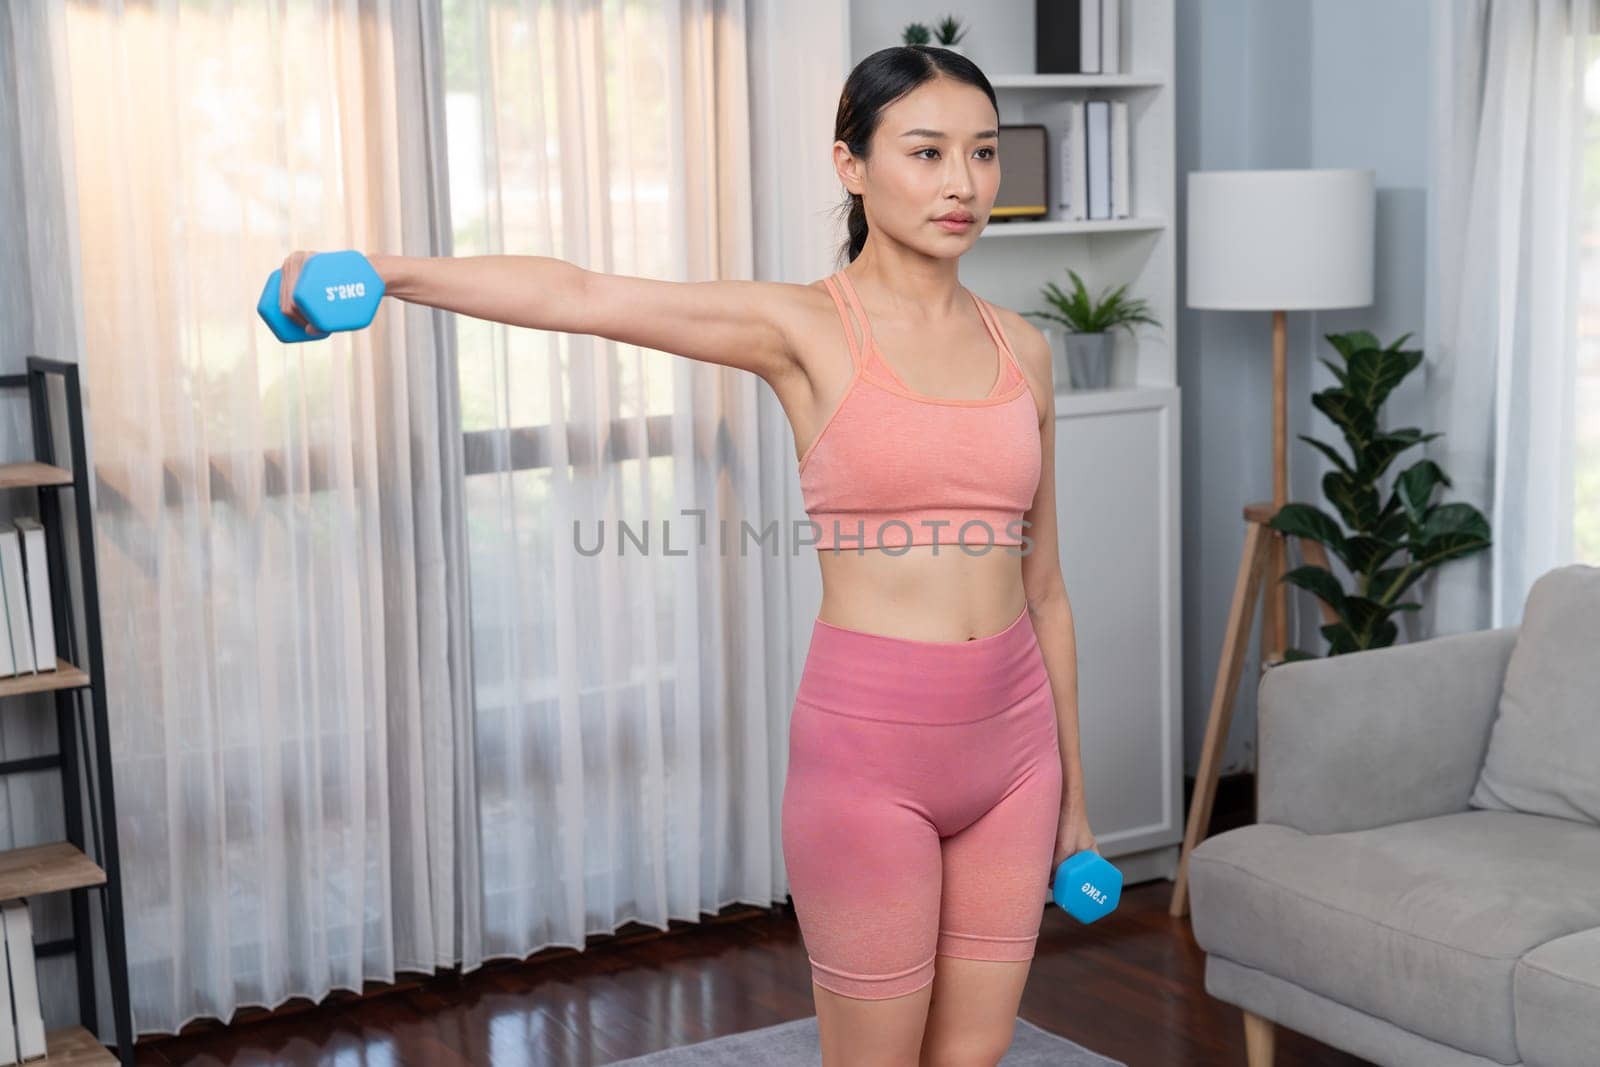 Vigorous energetic woman doing yoga with dumbbell weight lifting exercise at home. Young athletic asian woman strength and endurance training session as home workout routine.